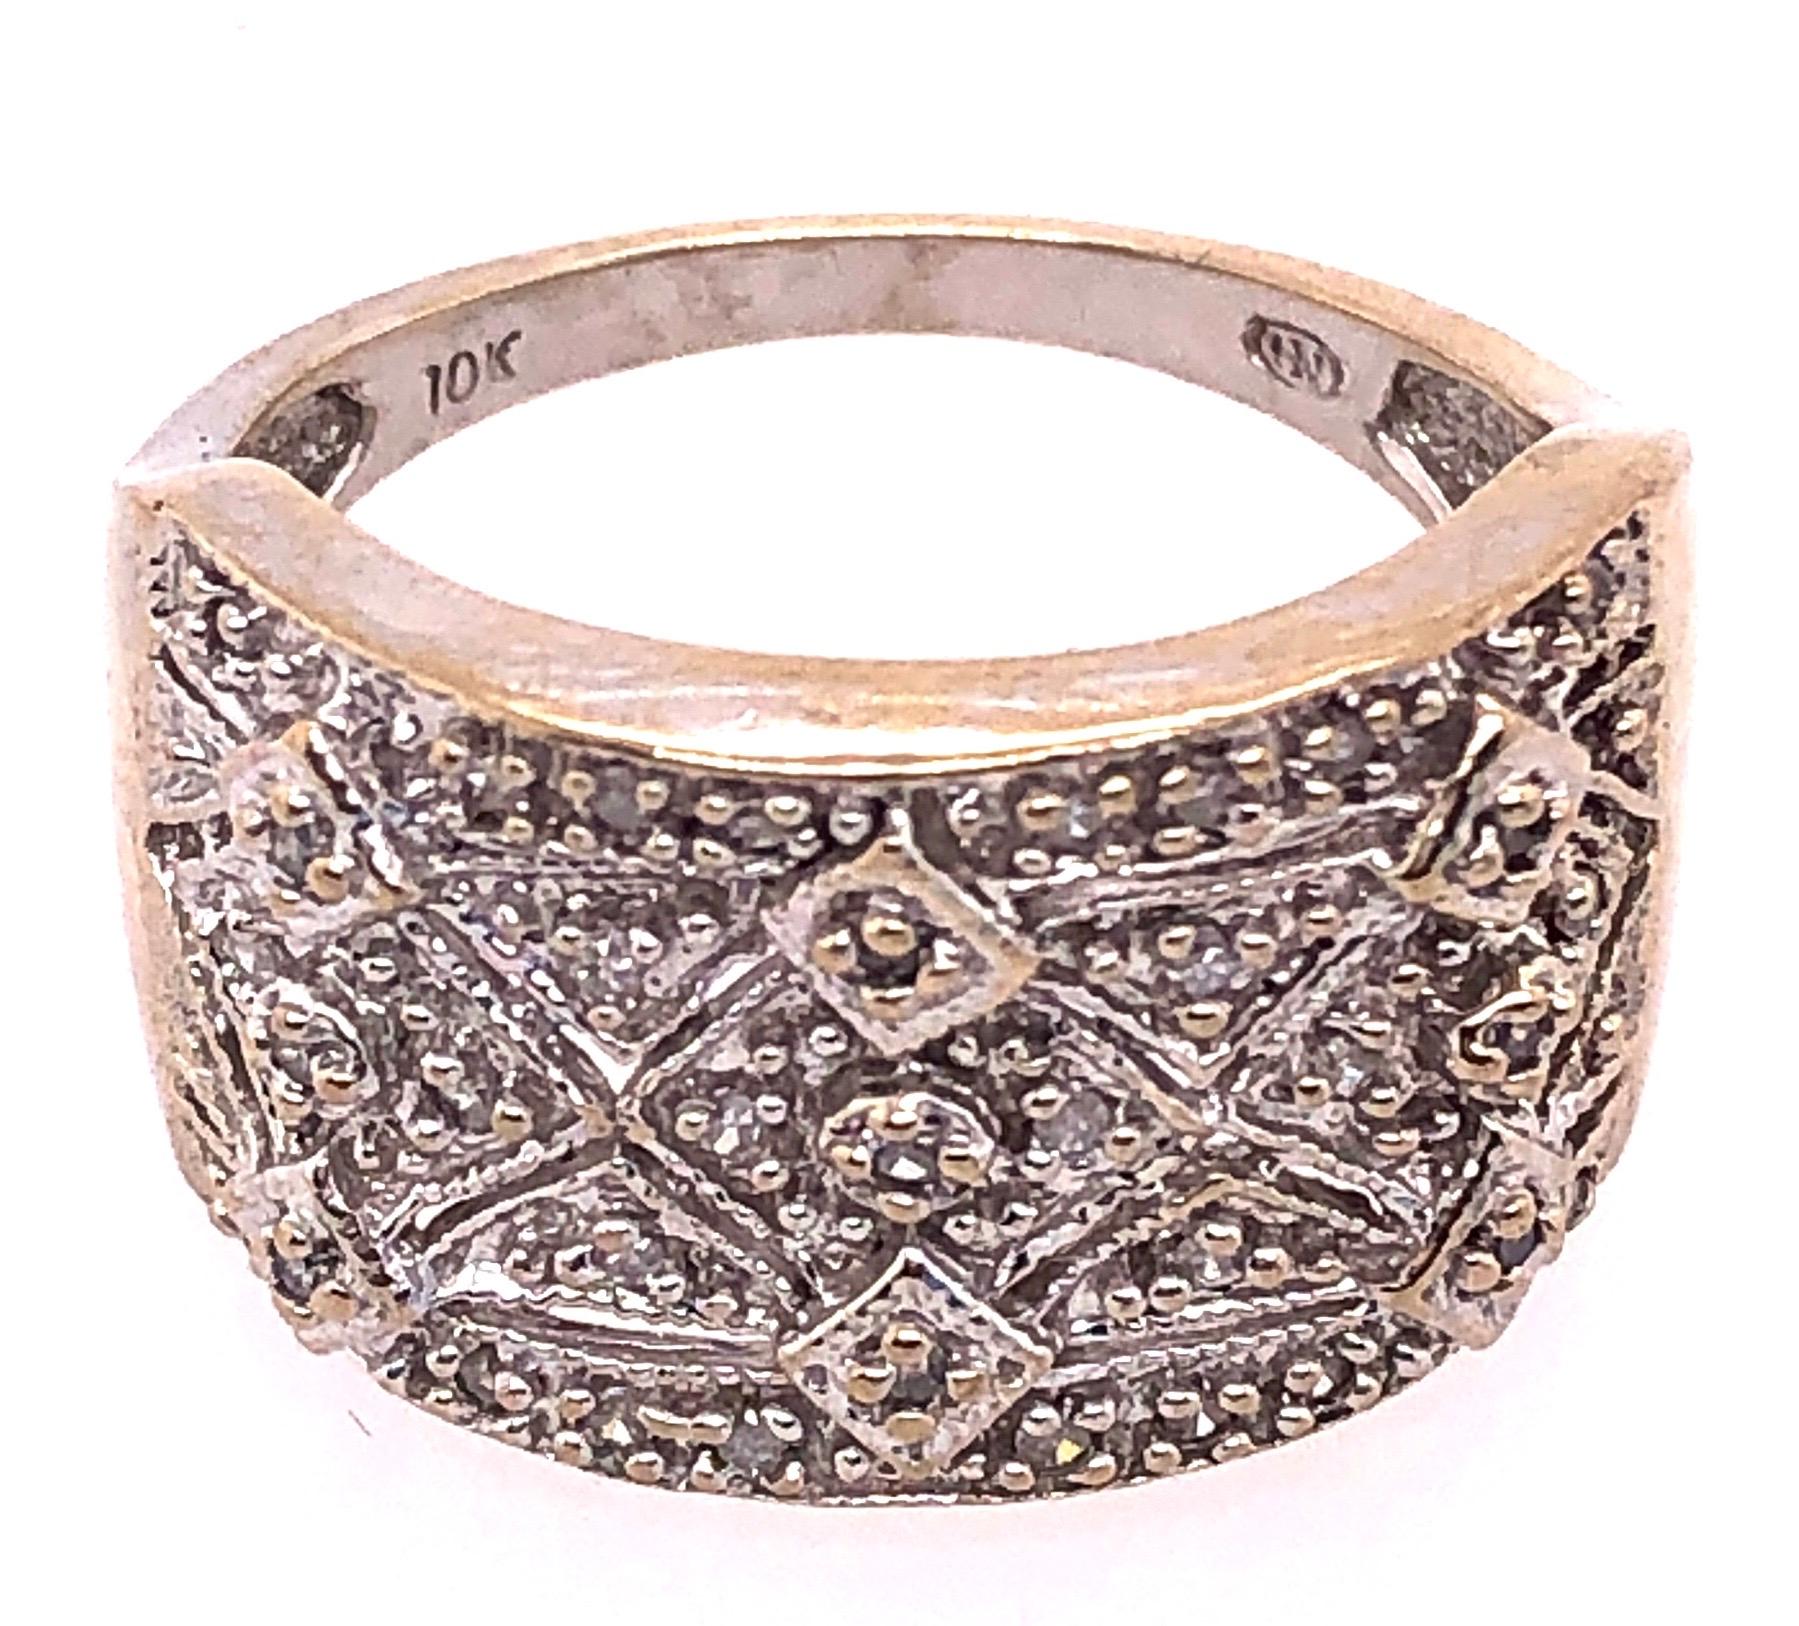 10 Karat Two Tone Yellow And White Gold With Diamond Accents Fashion Ring Band
Size 7
4.17 grams total weight.